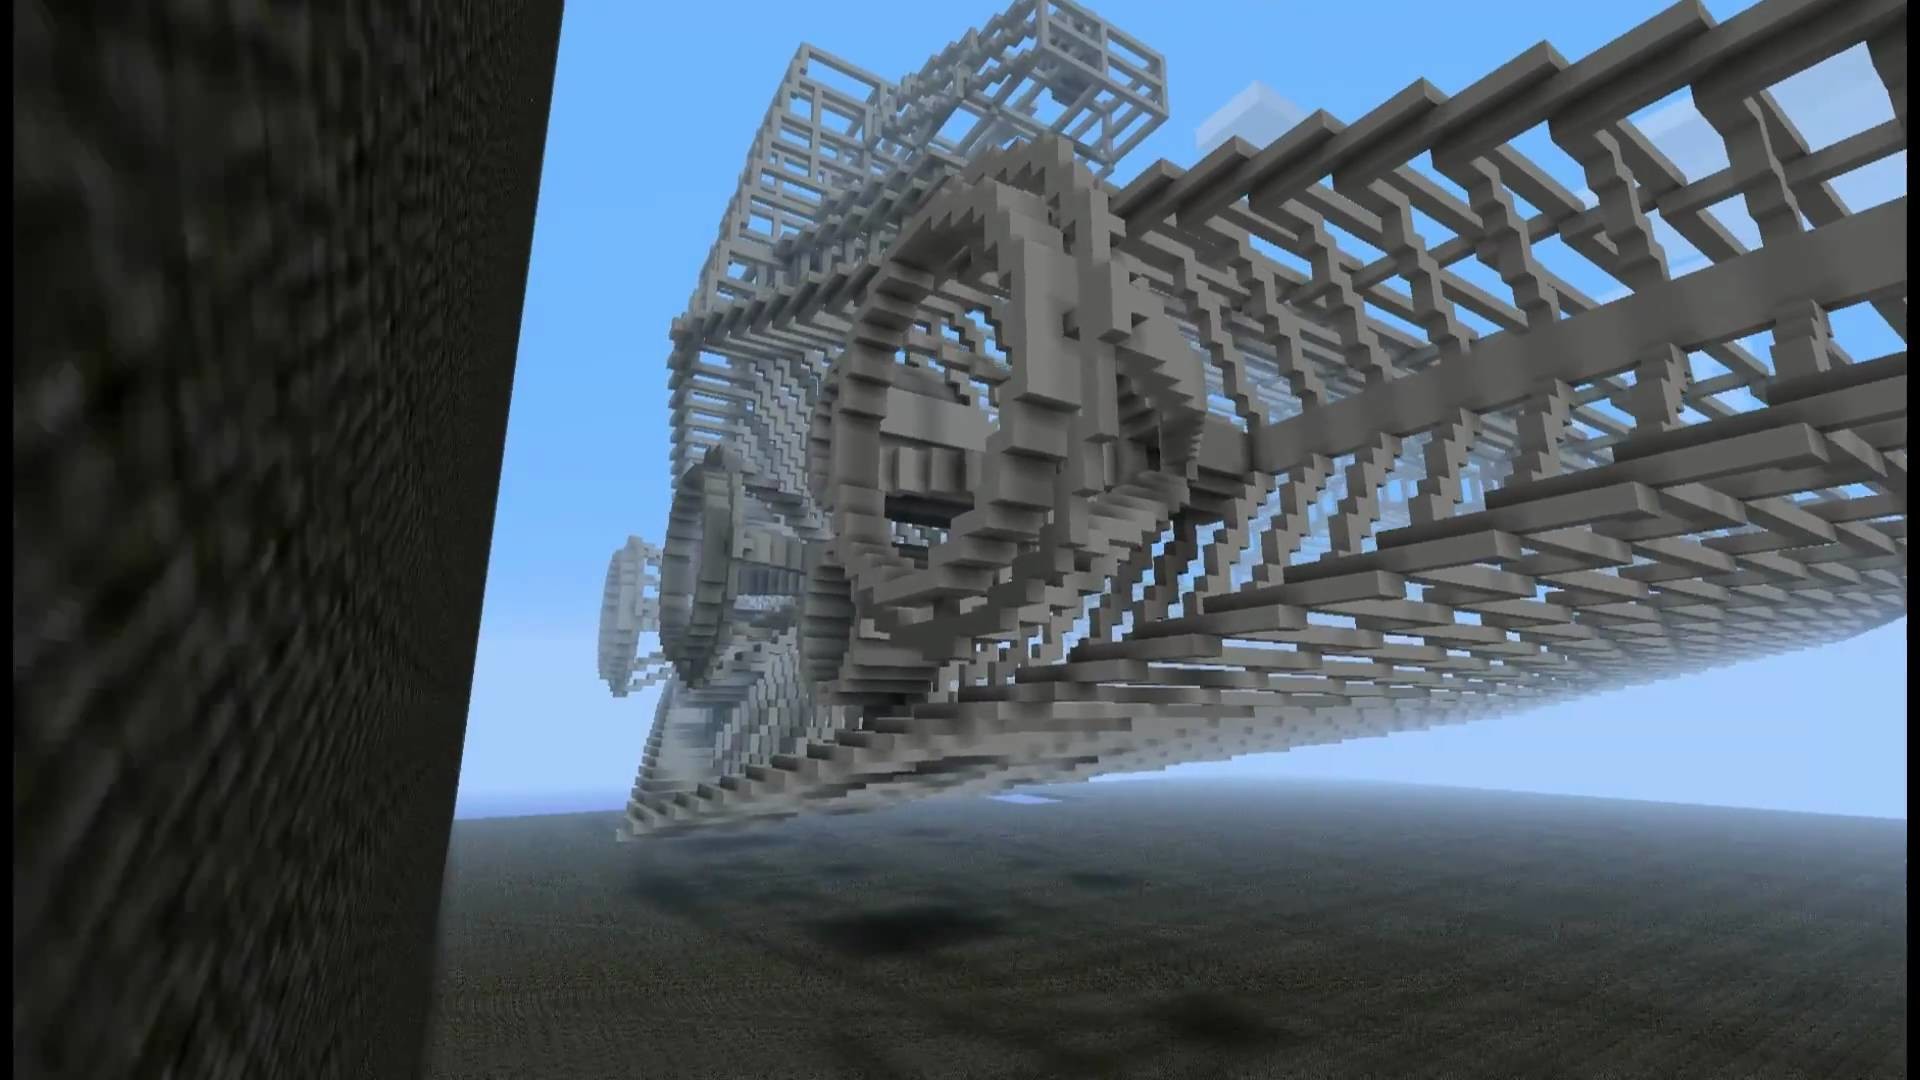 1920x1080 Minecraft Megaproject - Imperial Star Destroyer Part 1